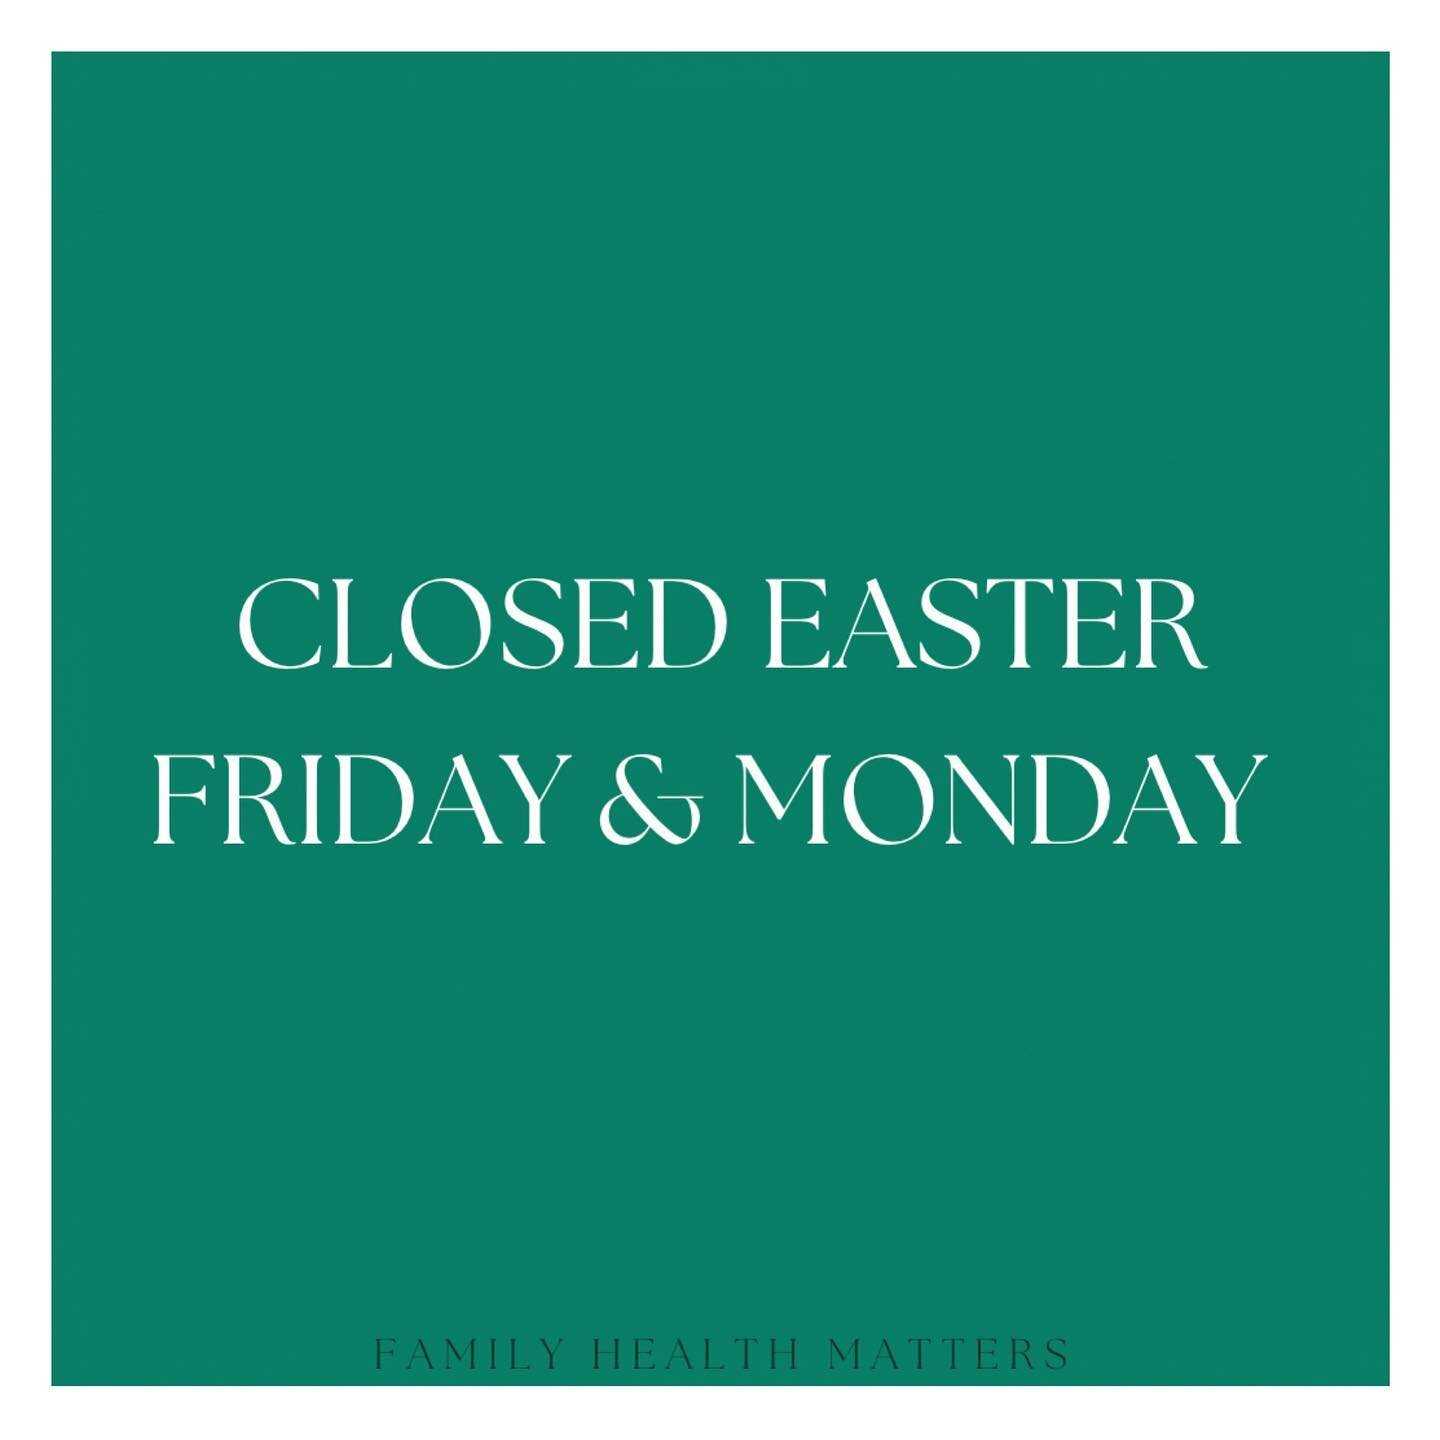 We are closed today (7th April, Good Friday) and again on Monday (10 April, Easter Monday). We re open on Tuesday 11 April at 8.30am. If you would like to make an appointment please email us or give us a call when we re open on Tuesday.  Wishing you 